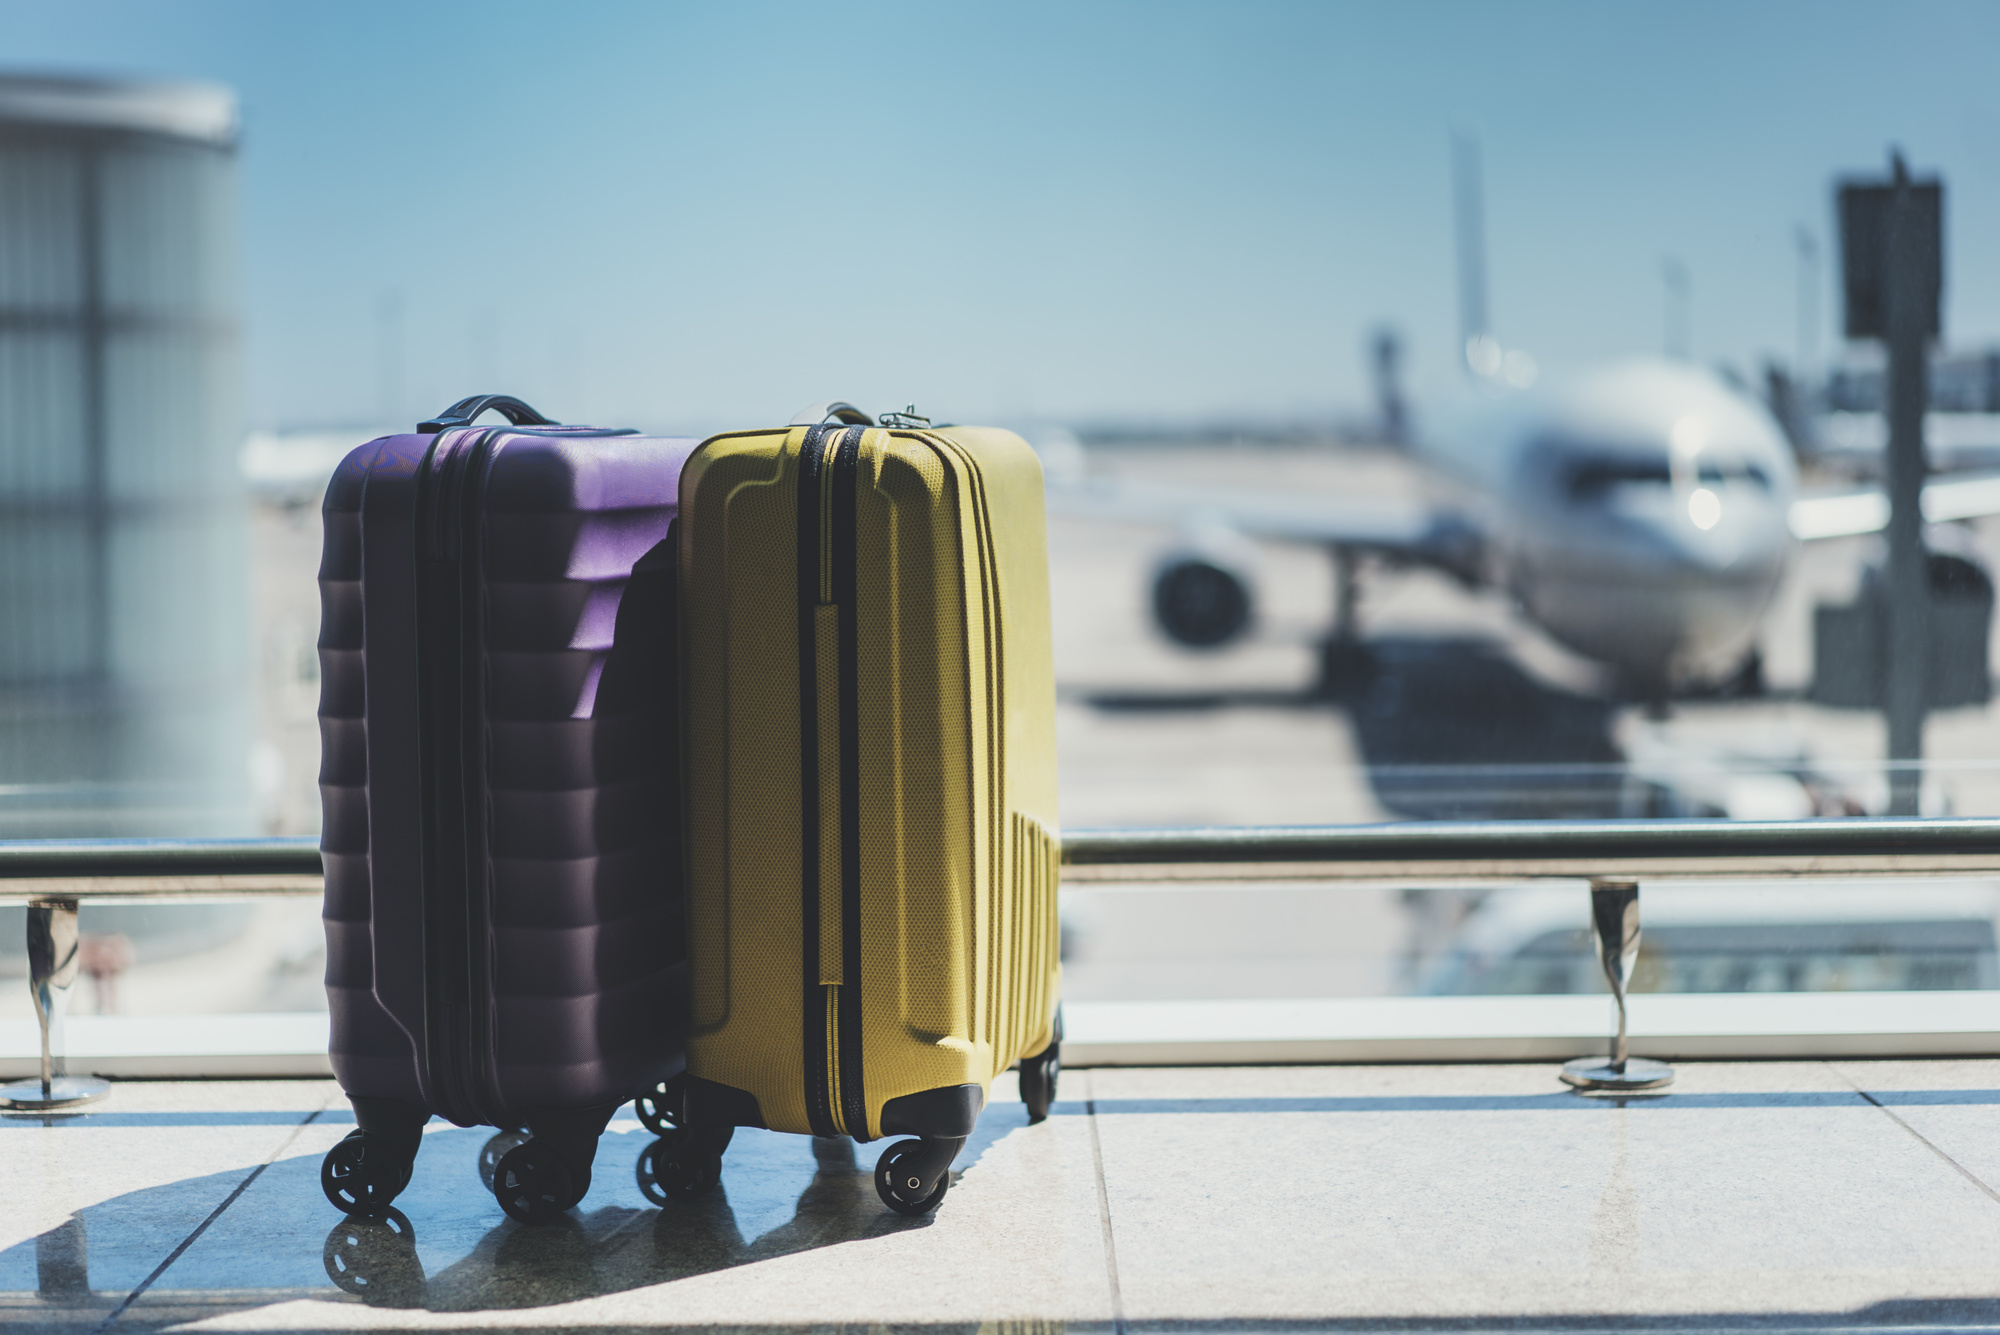 Carry-on vs checked bag: what's the best way to travel? | KAYAK